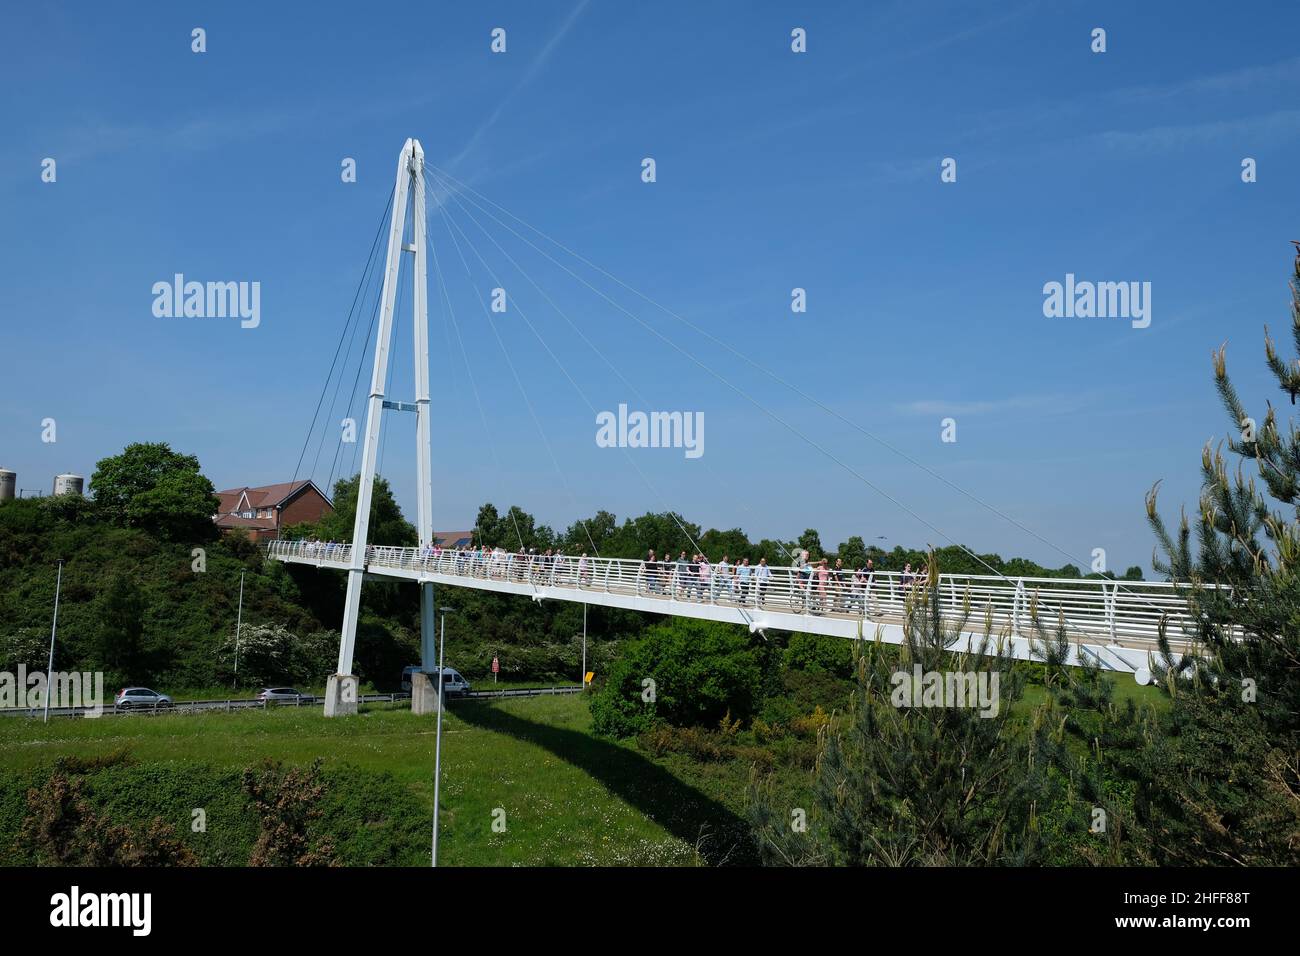 Exeter, UK - May 2018: The Baker Bridge is a cable stayed footbridge built in 2007, with an A-frame steel tower that crosses the A379 carriageway at 1 Stock Photo